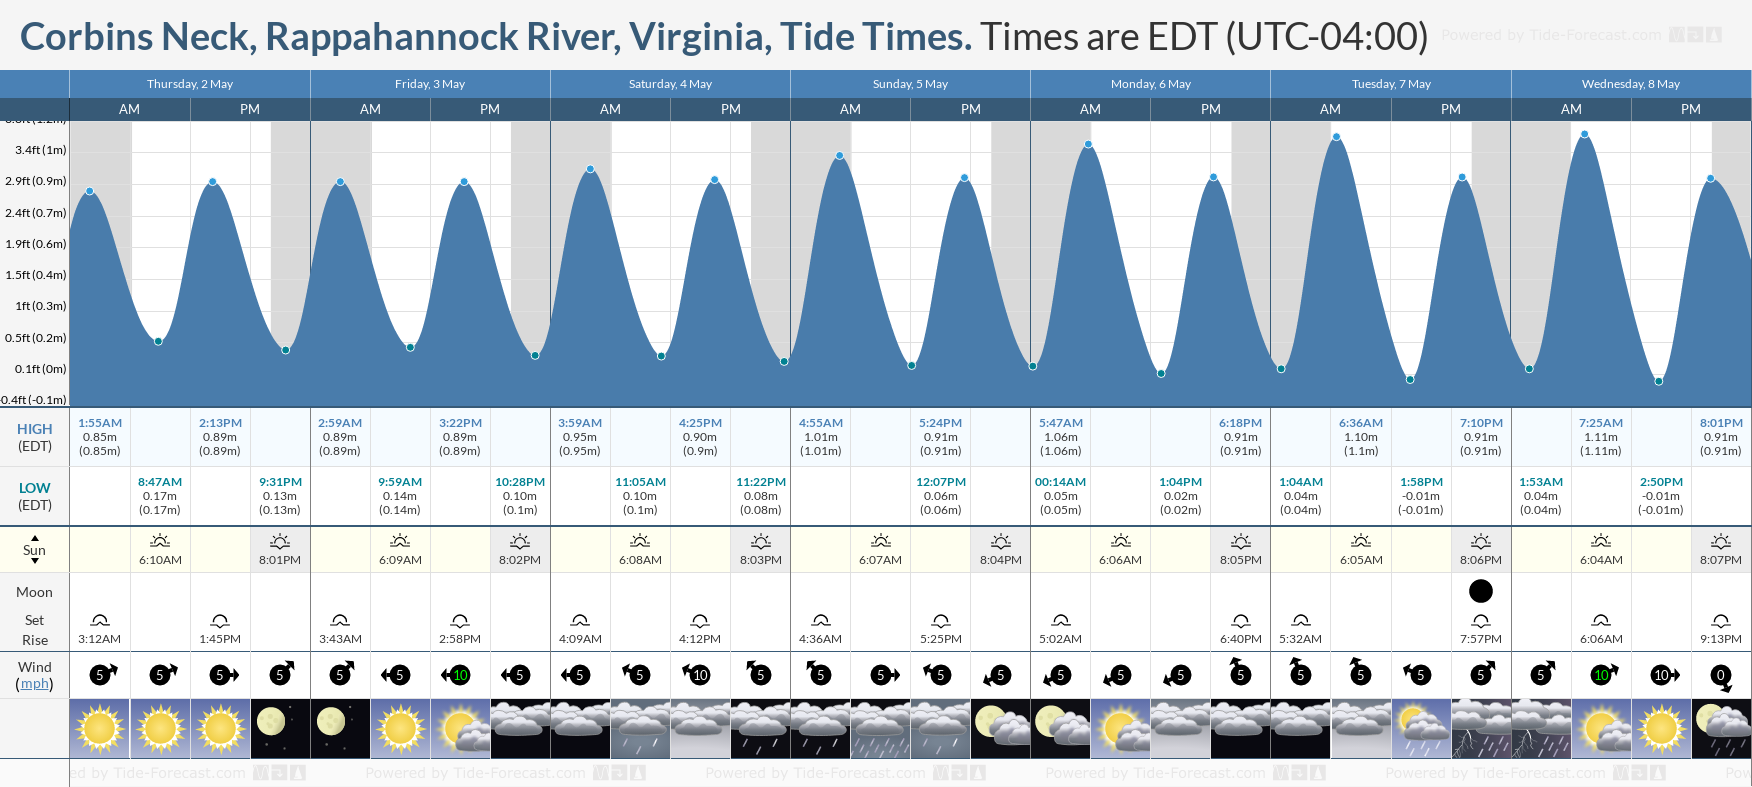 Corbins Neck, Rappahannock River, Virginia Tide Chart including high and low tide tide times for the next 7 days